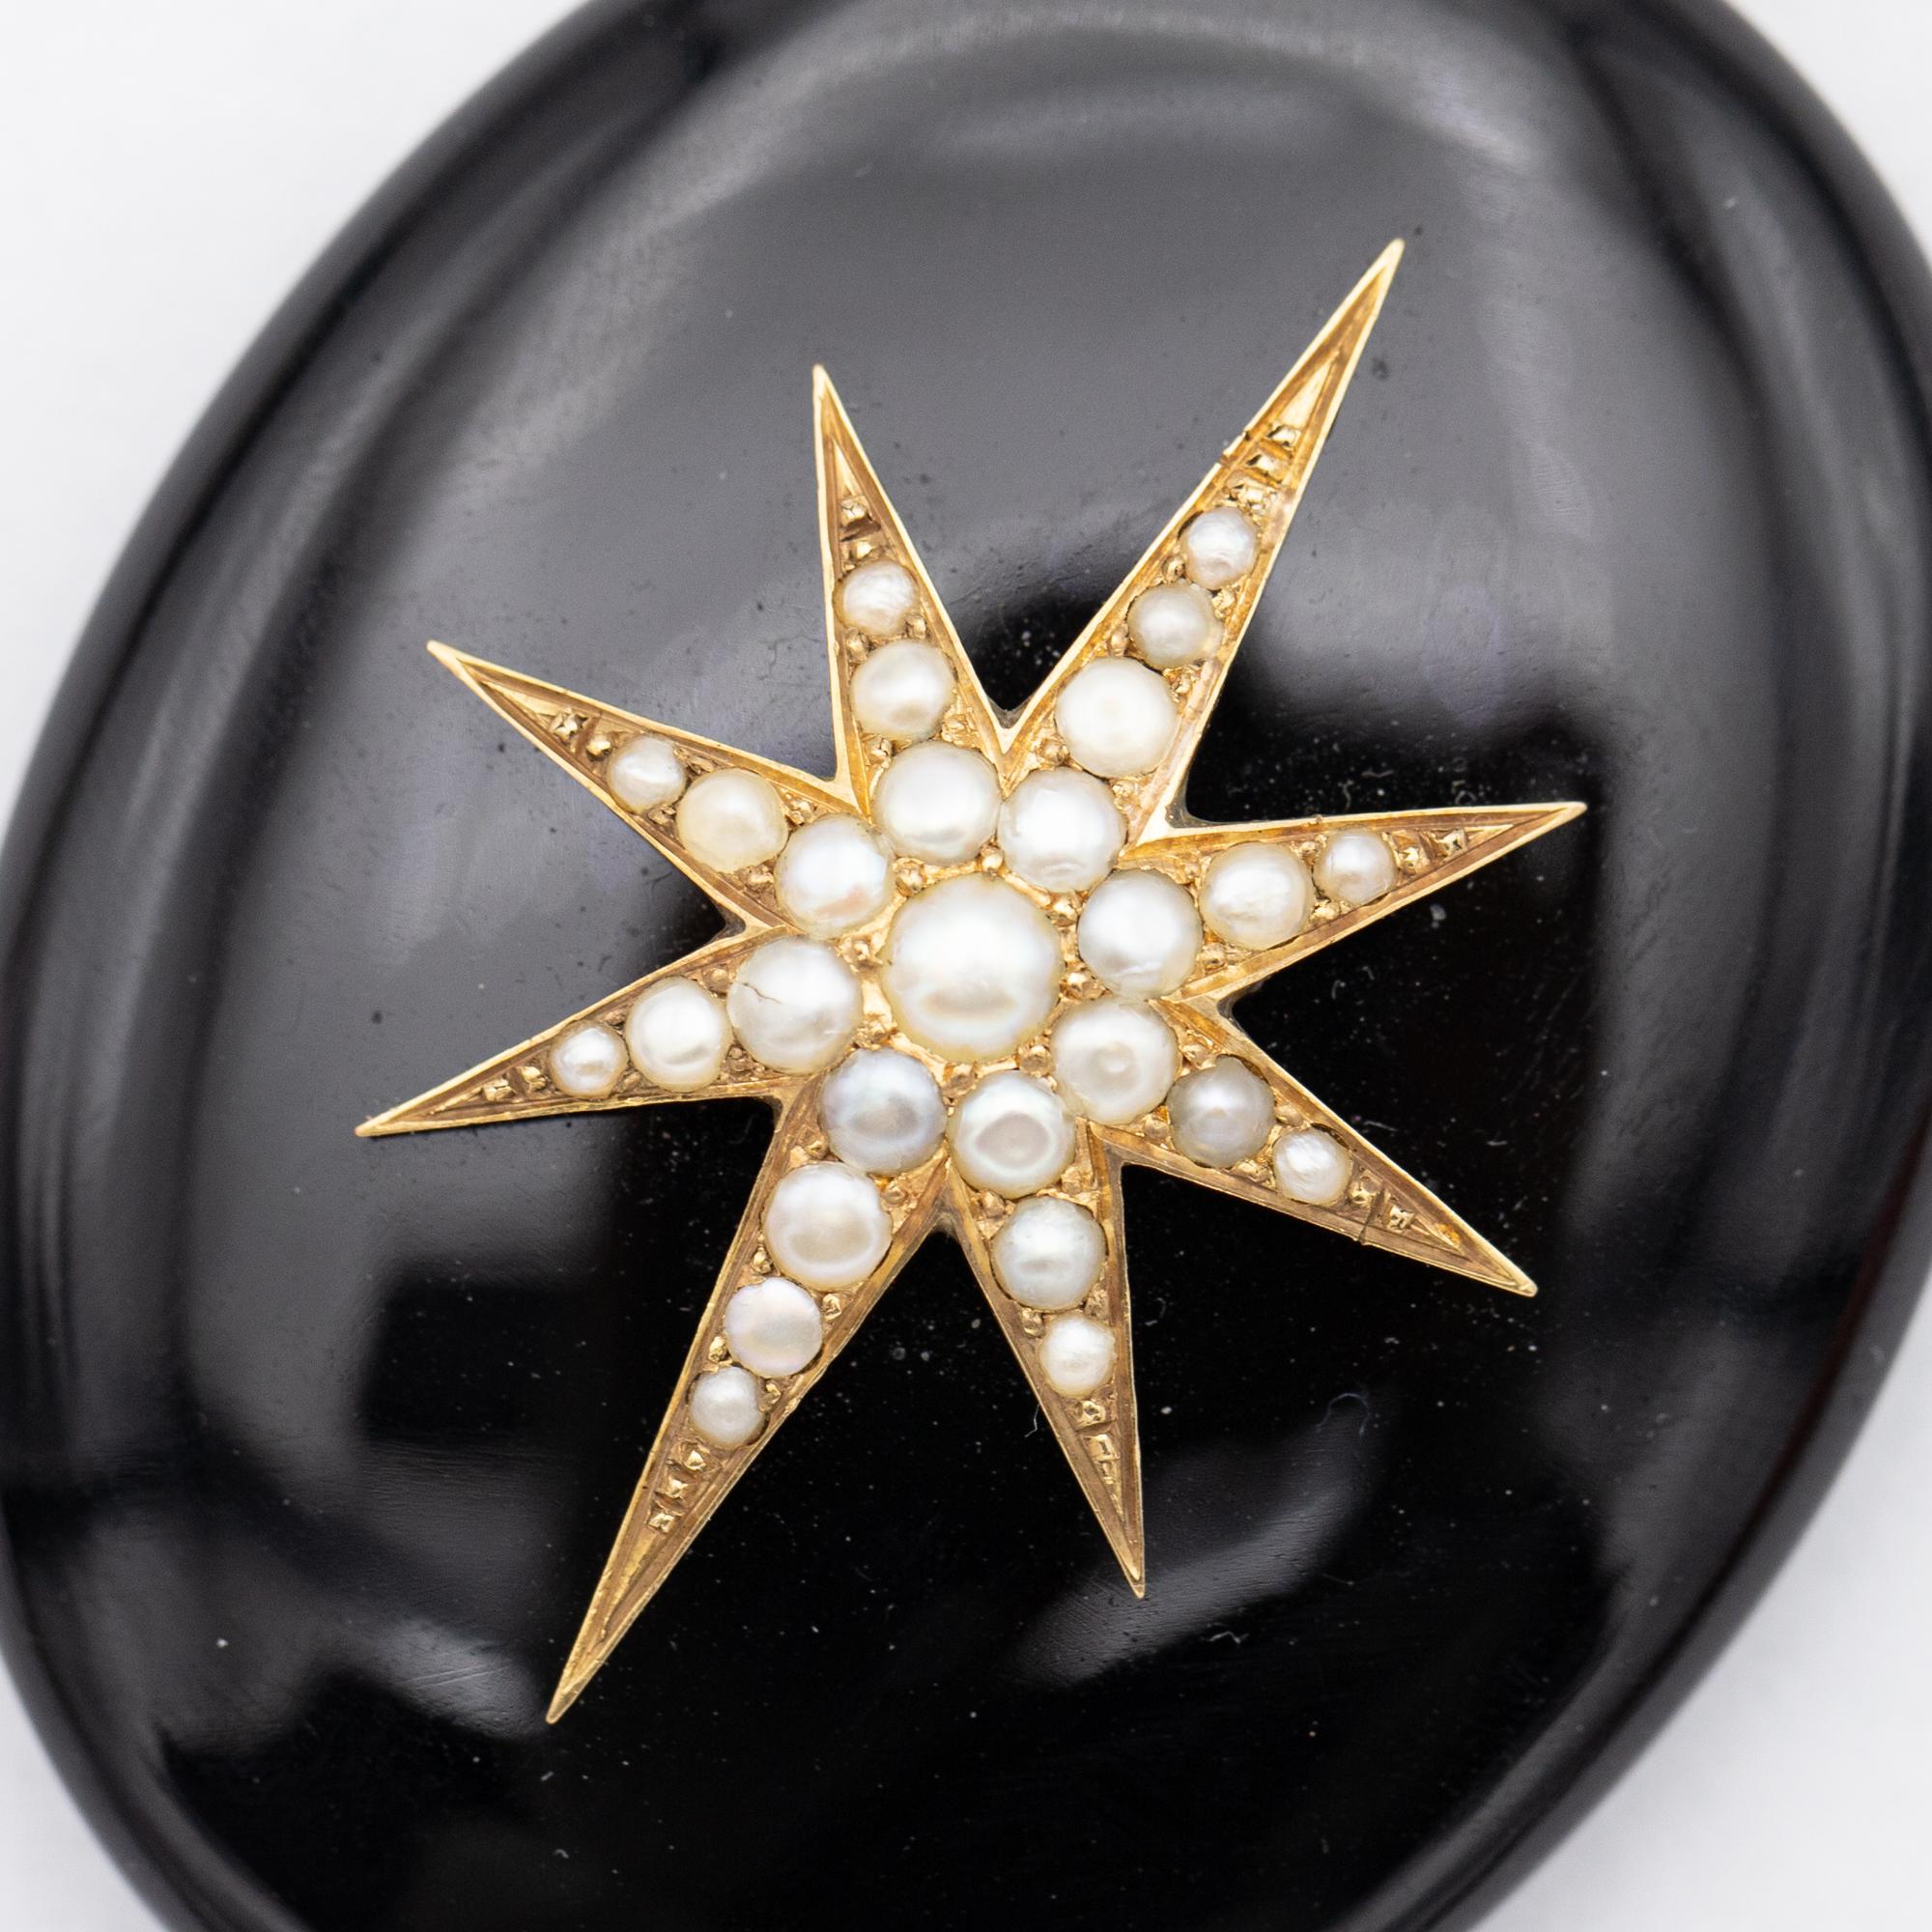 heavy 18K mourning pendant - solid gold Victorian Jet charm - Antique star 1870s 4